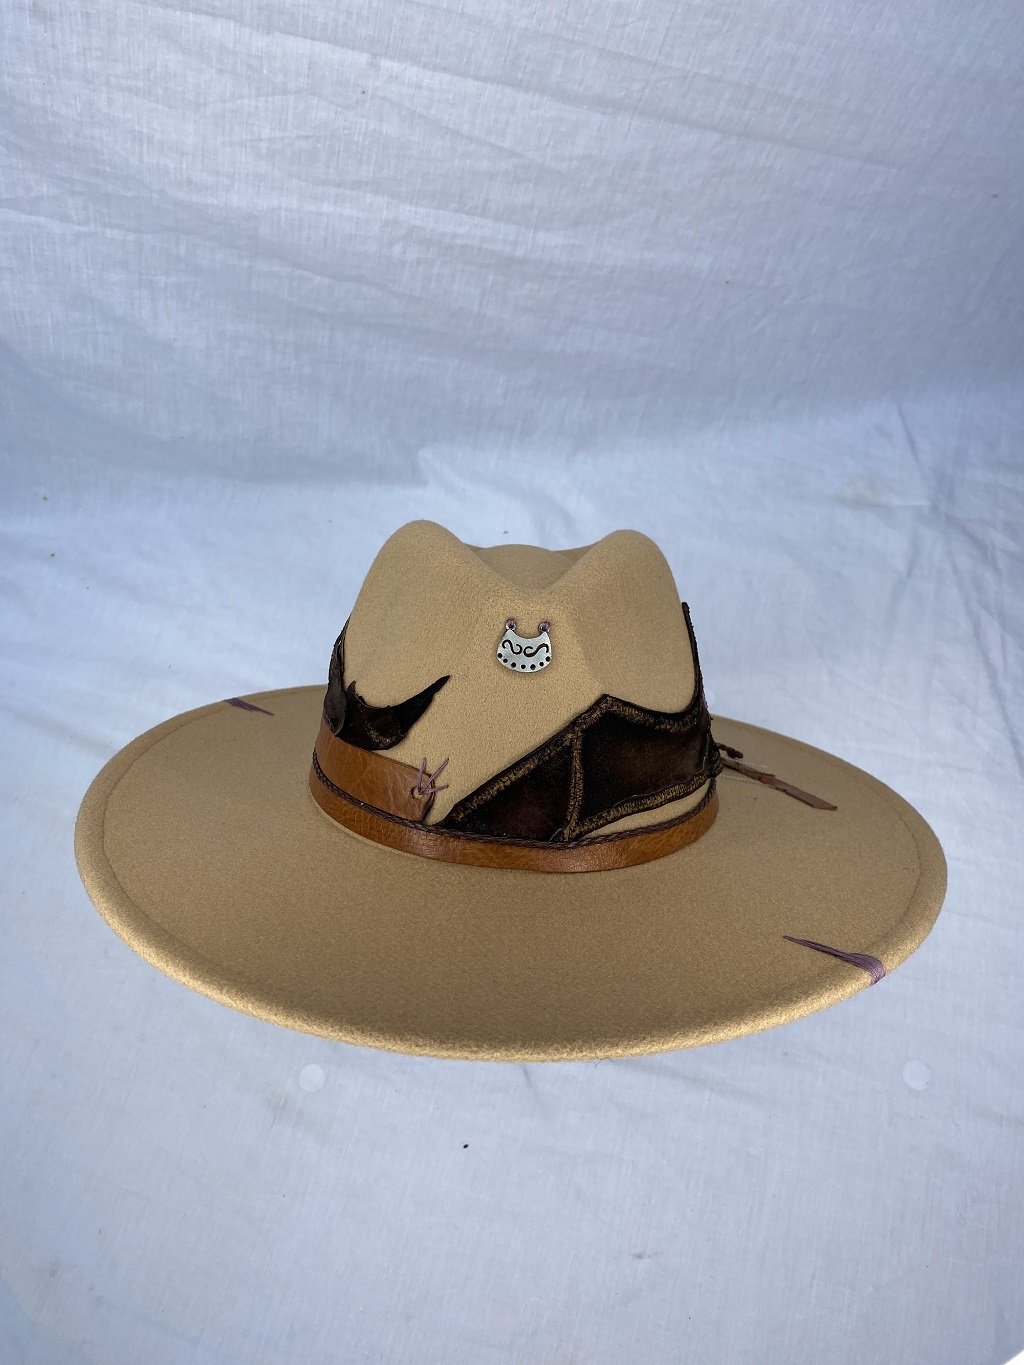 Wide-Brimmed Fedora Hat "Caballo", Hand-Decorated (Hart).